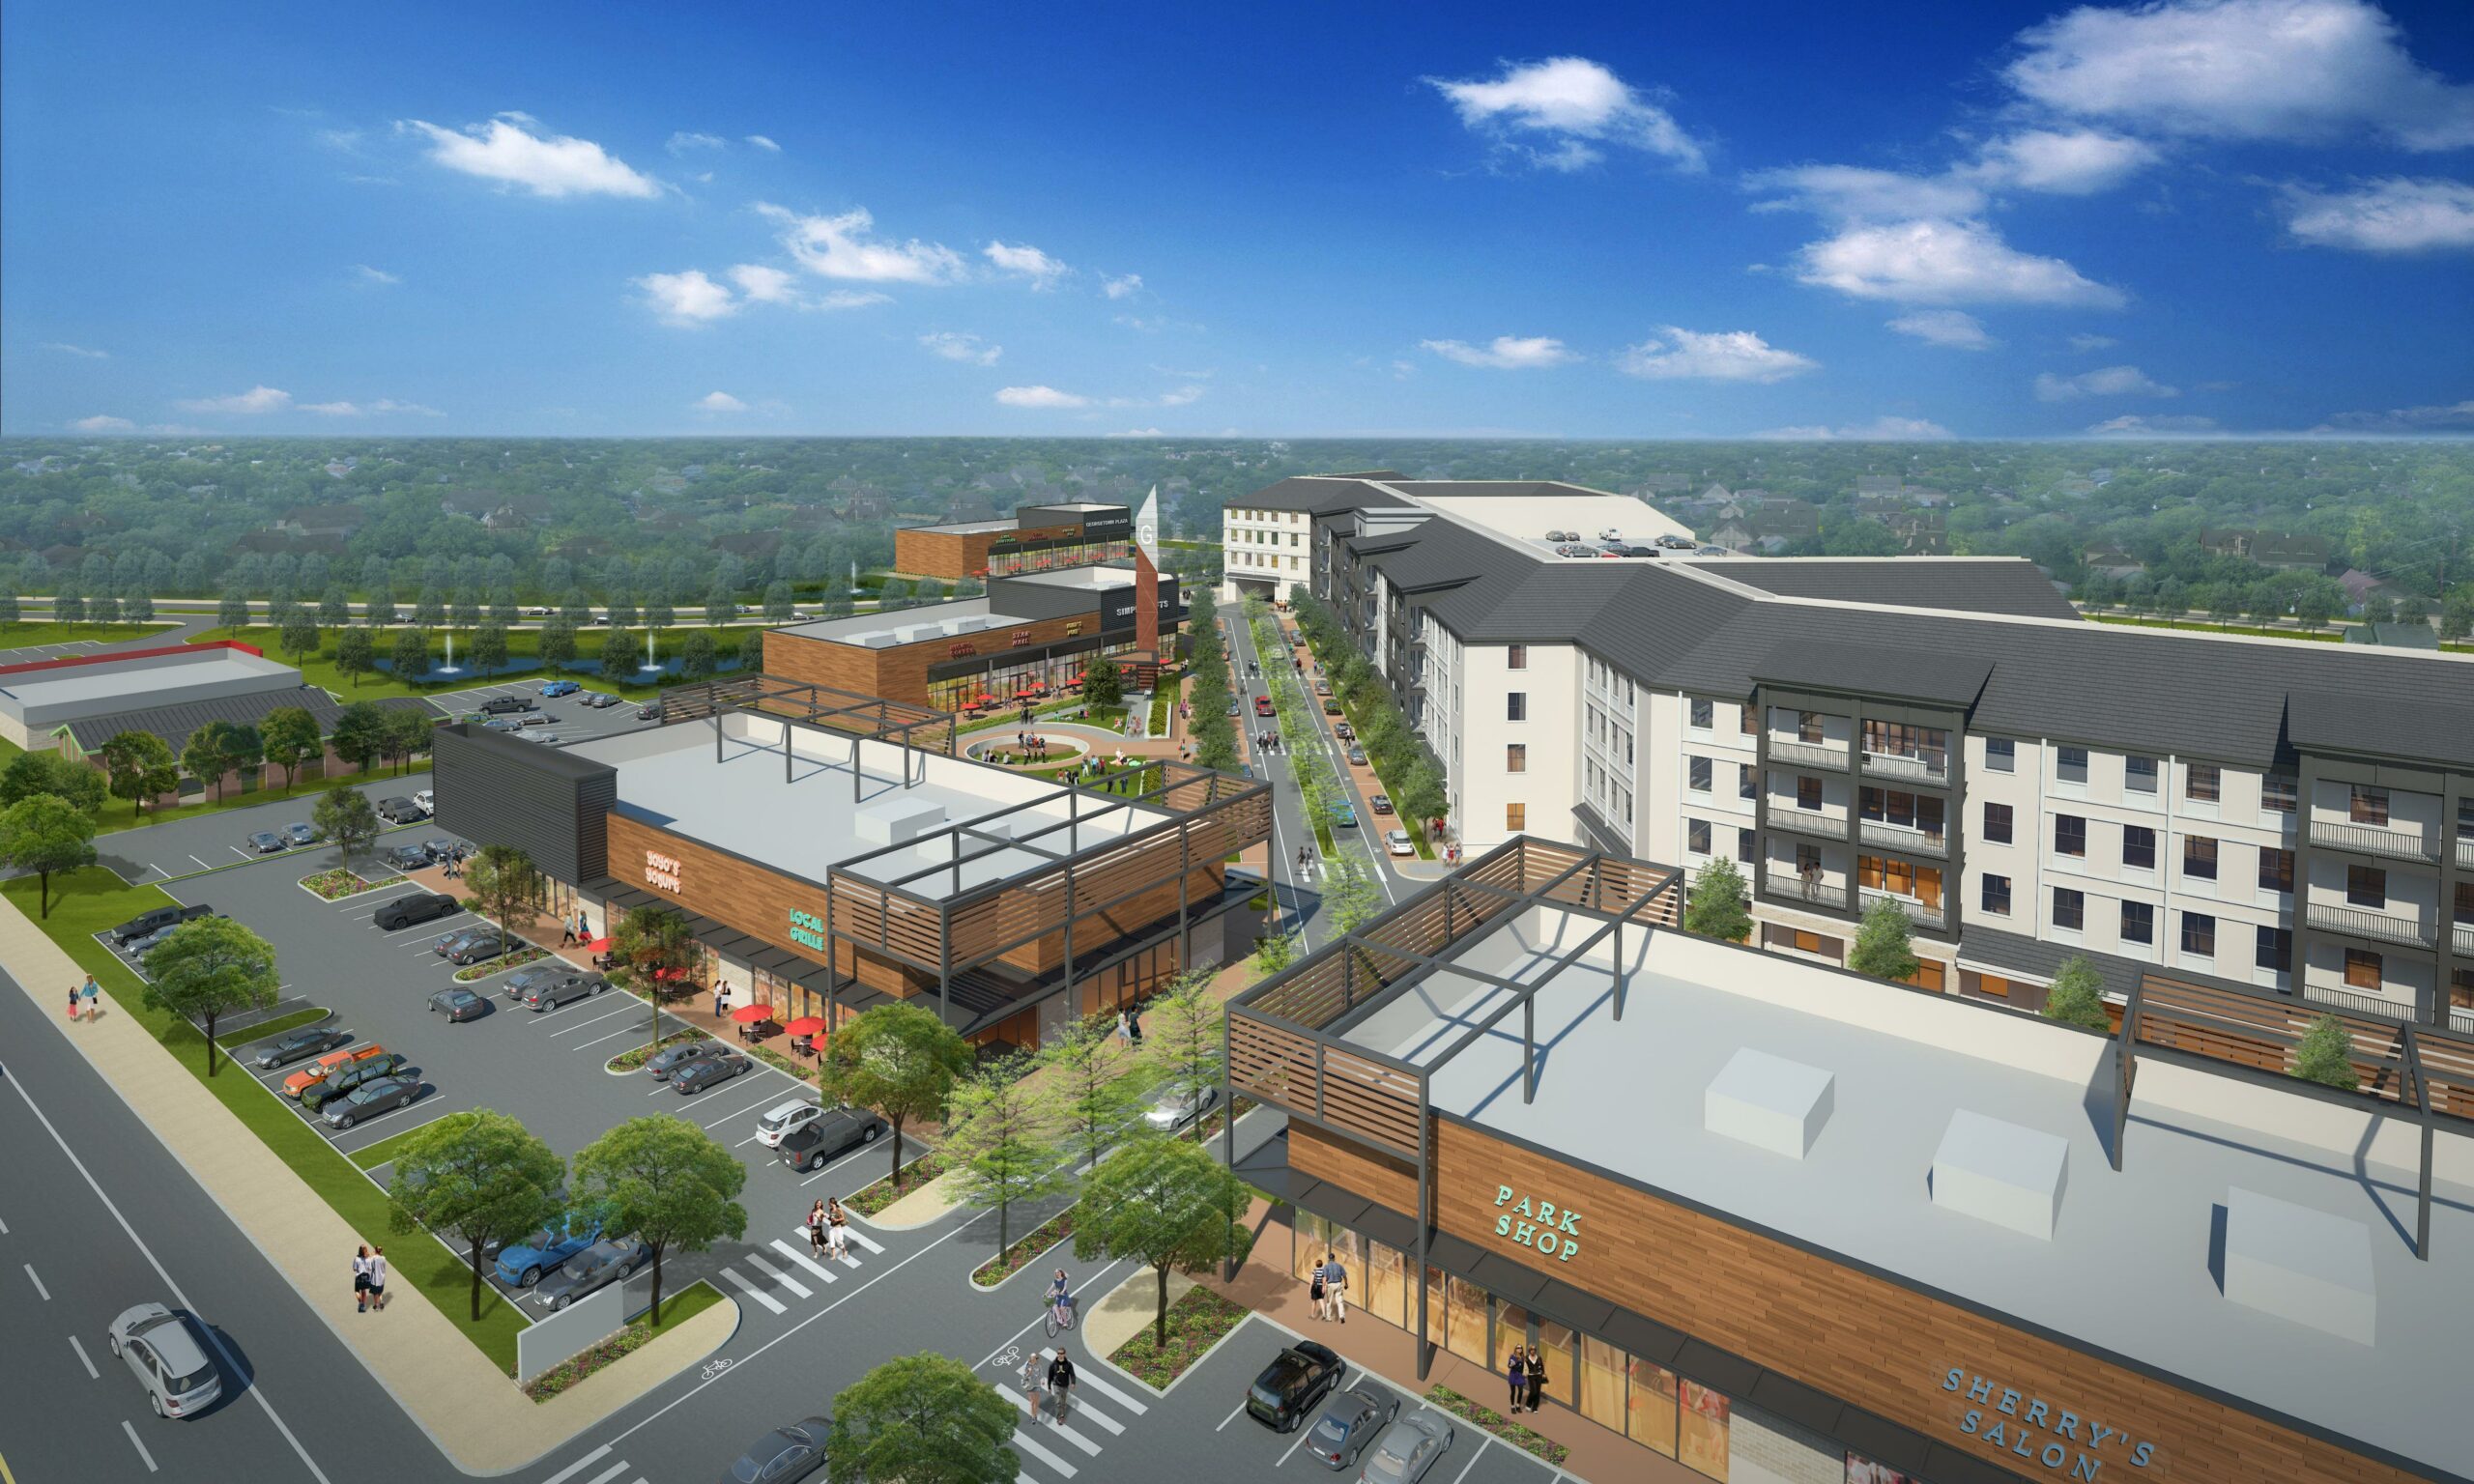 Novak acquires approximately six acres from Partners to create apartment anchor for The Commons At Rivery, a new mixed-use development at the gateway to Georgetown, TX. Partners Real Estate